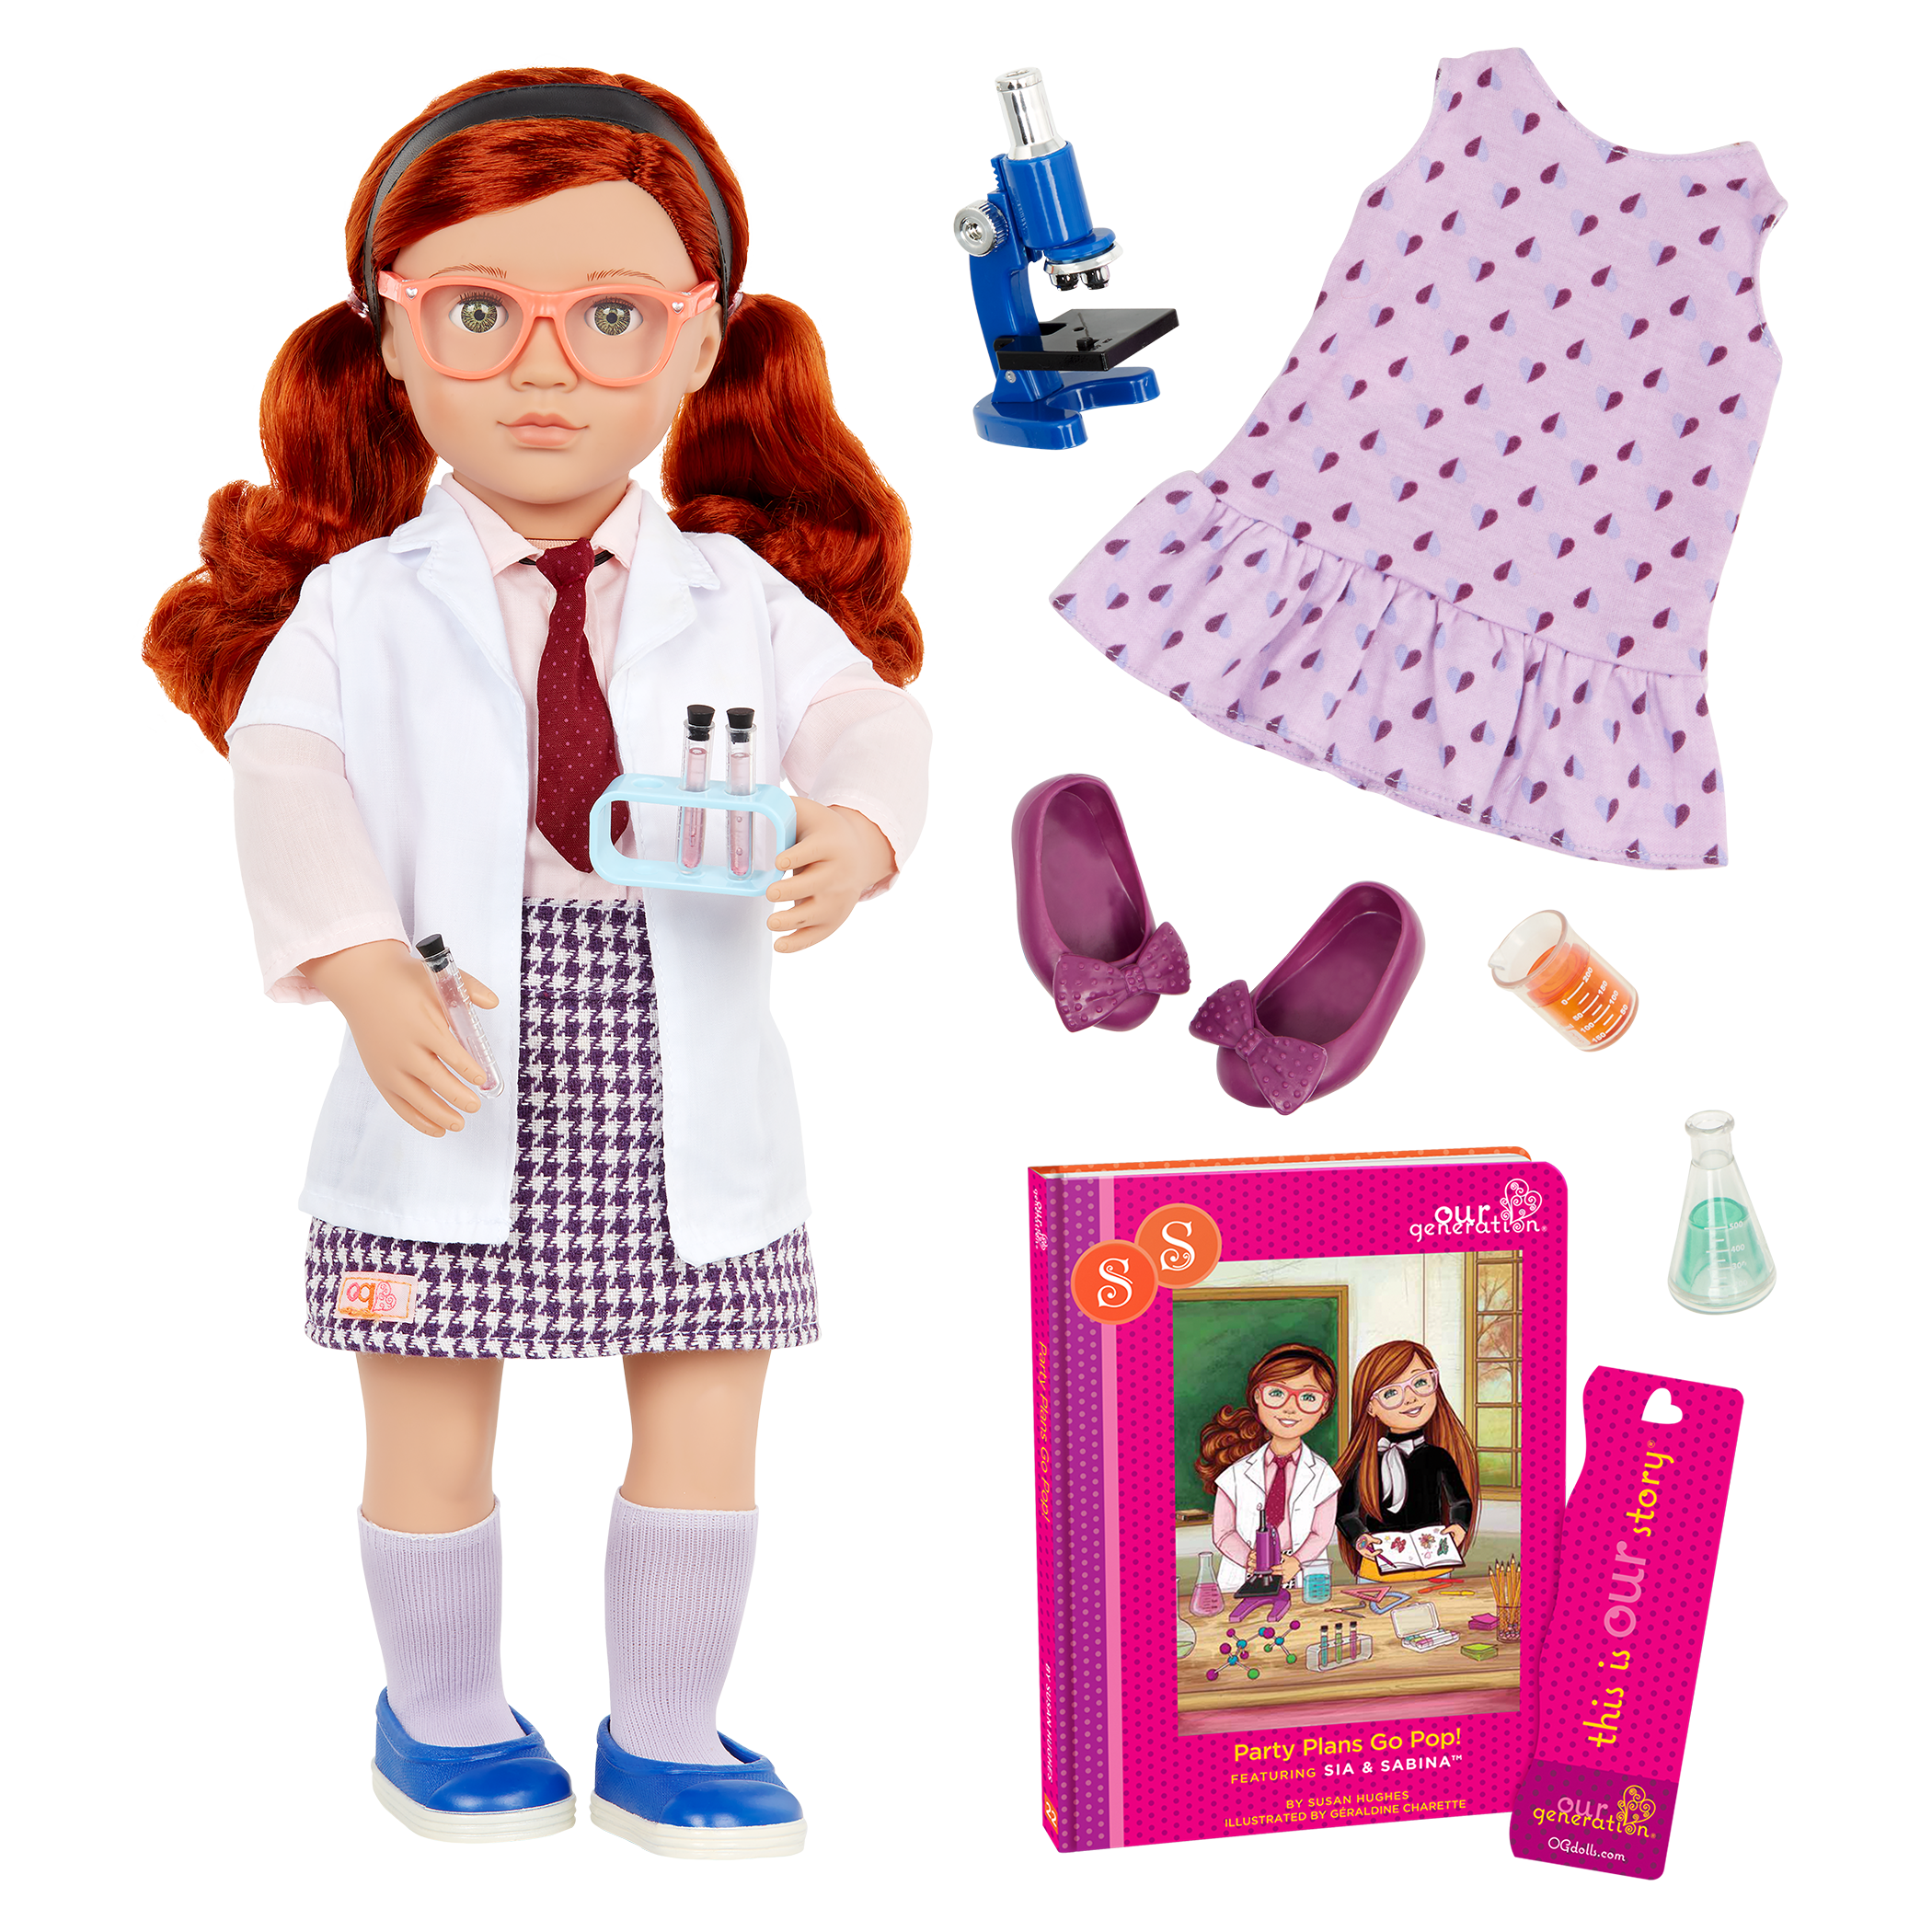 https://ourgeneration.com/wp-content/uploads/BD31113_Our-Generation-Posable-18-inch-Science-Doll-Sia-MAIN.png